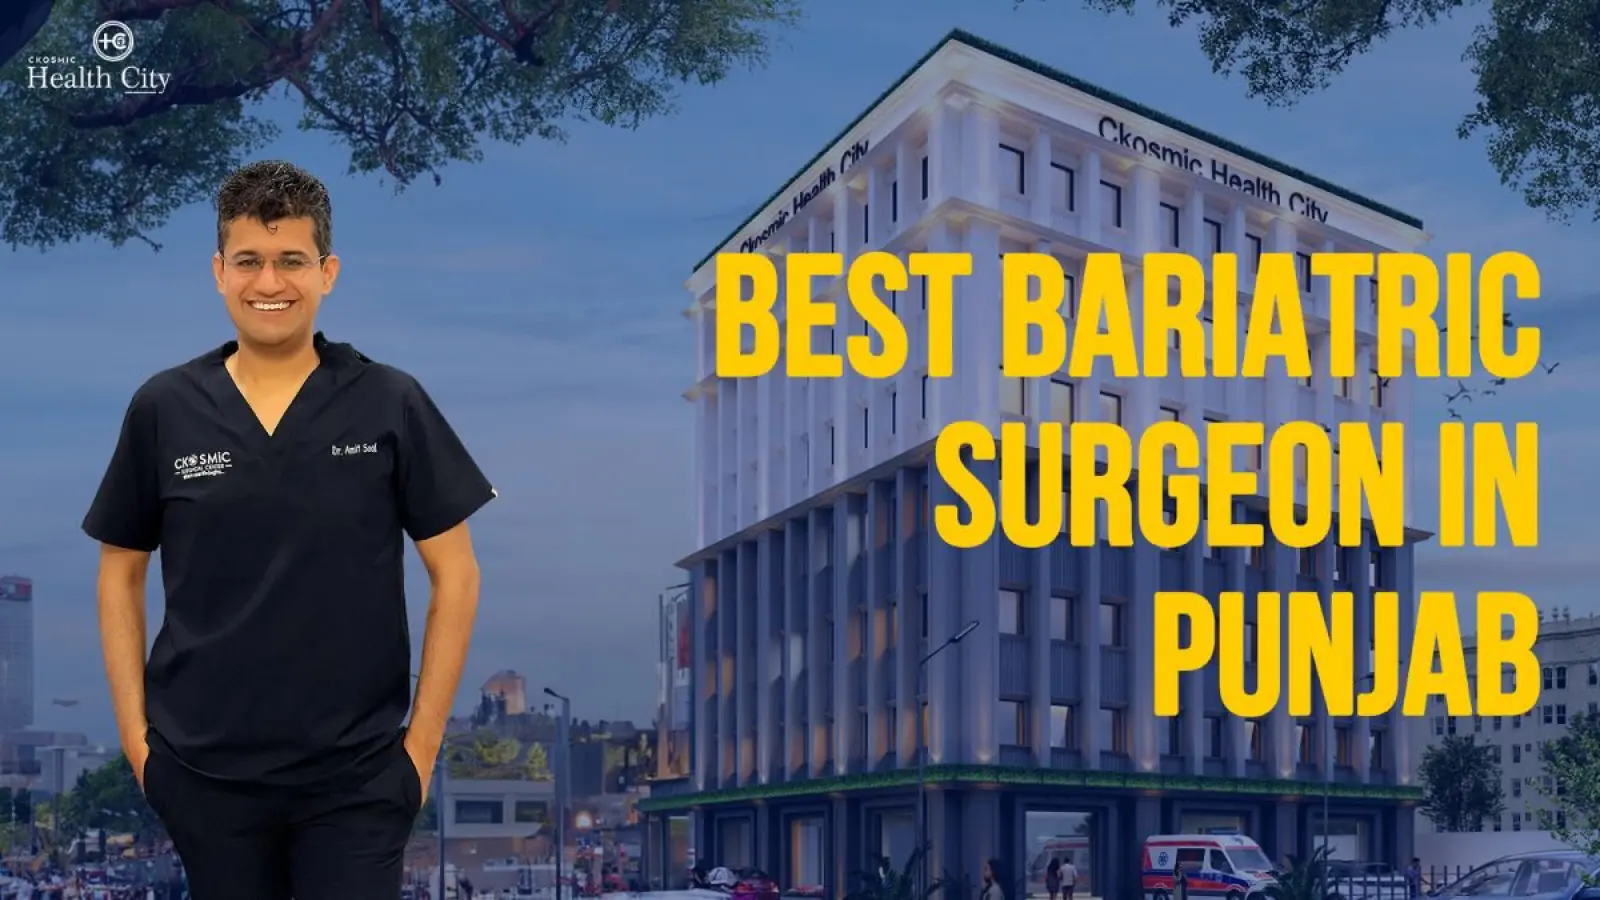 The Ultimate Guide to Choosing The Best bariatric surgeon in Punjab